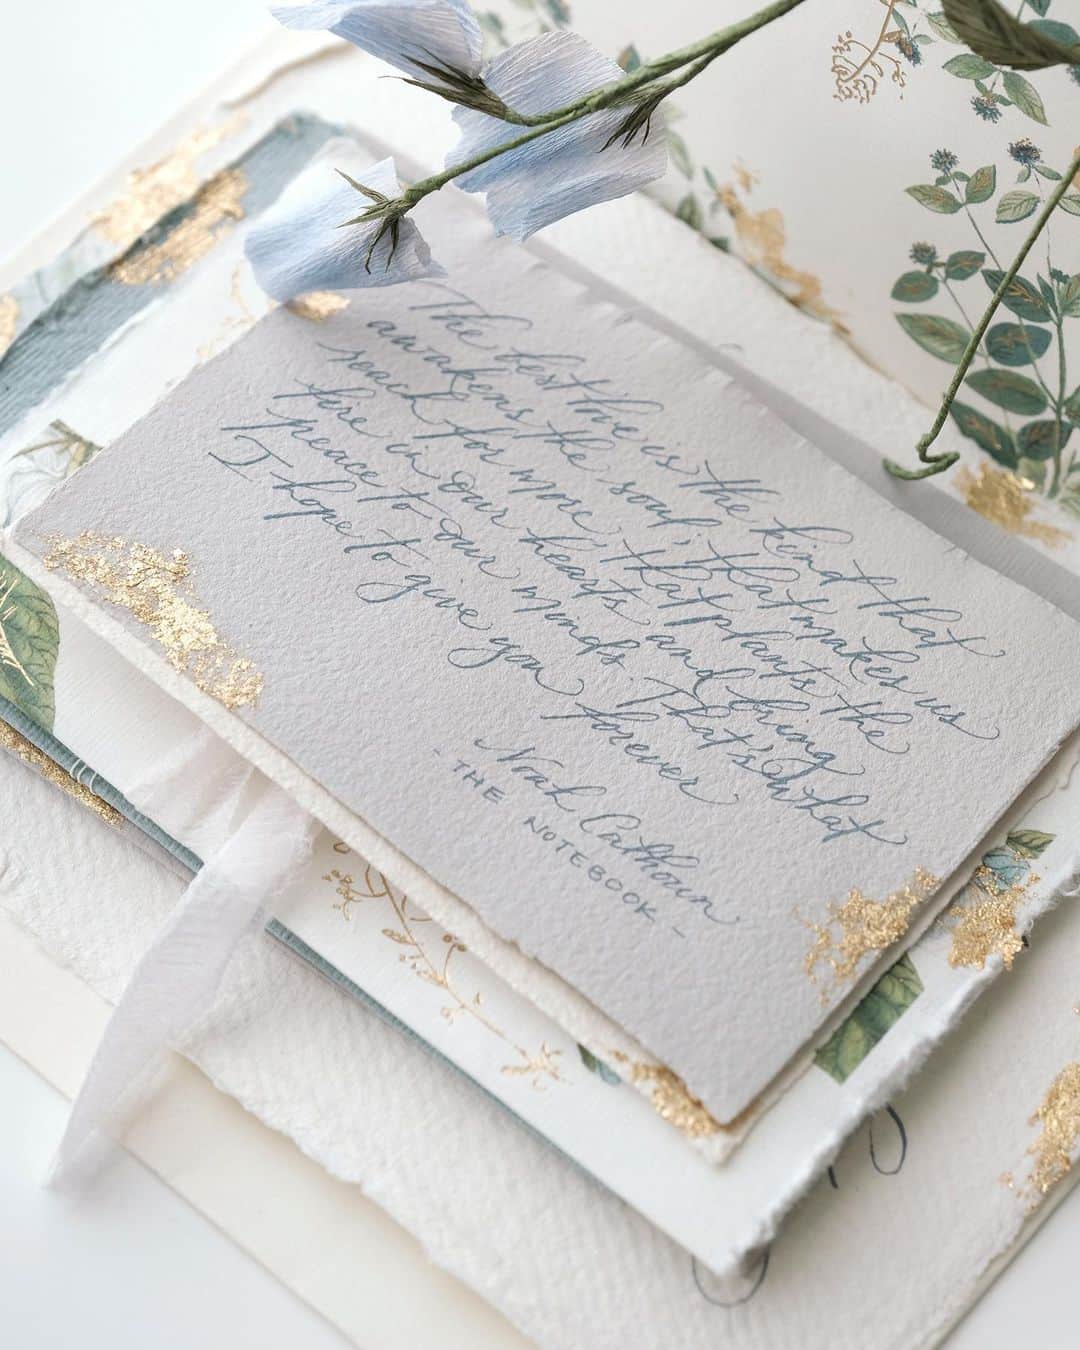 Veronica Halimさんのインスタグラム写真 - (Veronica HalimInstagram)「日本の素敵なカップルのため、 Handmade Styled Shoot Invitation Set「手書き撮影用招待状セット」。新型コロナウィルス感染症の影響で多くの人が結婚式のスケジュールを調整されよりプライベートなパーティーに変更した方々も多いではないかと思います。その特別な日の形見とお祝いを形にするように今回の手書き招待状を作りました。   Handmade Styled Shoot Invitation Set for a sweet couple in Japan. Due to the pandemic many people decided to postponed their reception party and decided to go ahead with an intimate ceremony with family and close friends. This handmade invitation was created as a special keepsake and part of the celebratory that captured the precious moment. —   #vhcalligraphy #truffypi #カリグラフィー #カリグラフィースタイリング #モダンカリグラフィー #calligraphystyling #カリグラフィーワークショップ #weddingstationery #moderncalligraphy #handmadepaper  #penmanship #ウェディング #ウェディングアイテム #カリグラファ #スタイリングワークショップ #スタイリング #prettypapers #weddingsuite #styledshootbundle」12月3日 0時08分 - truffypi